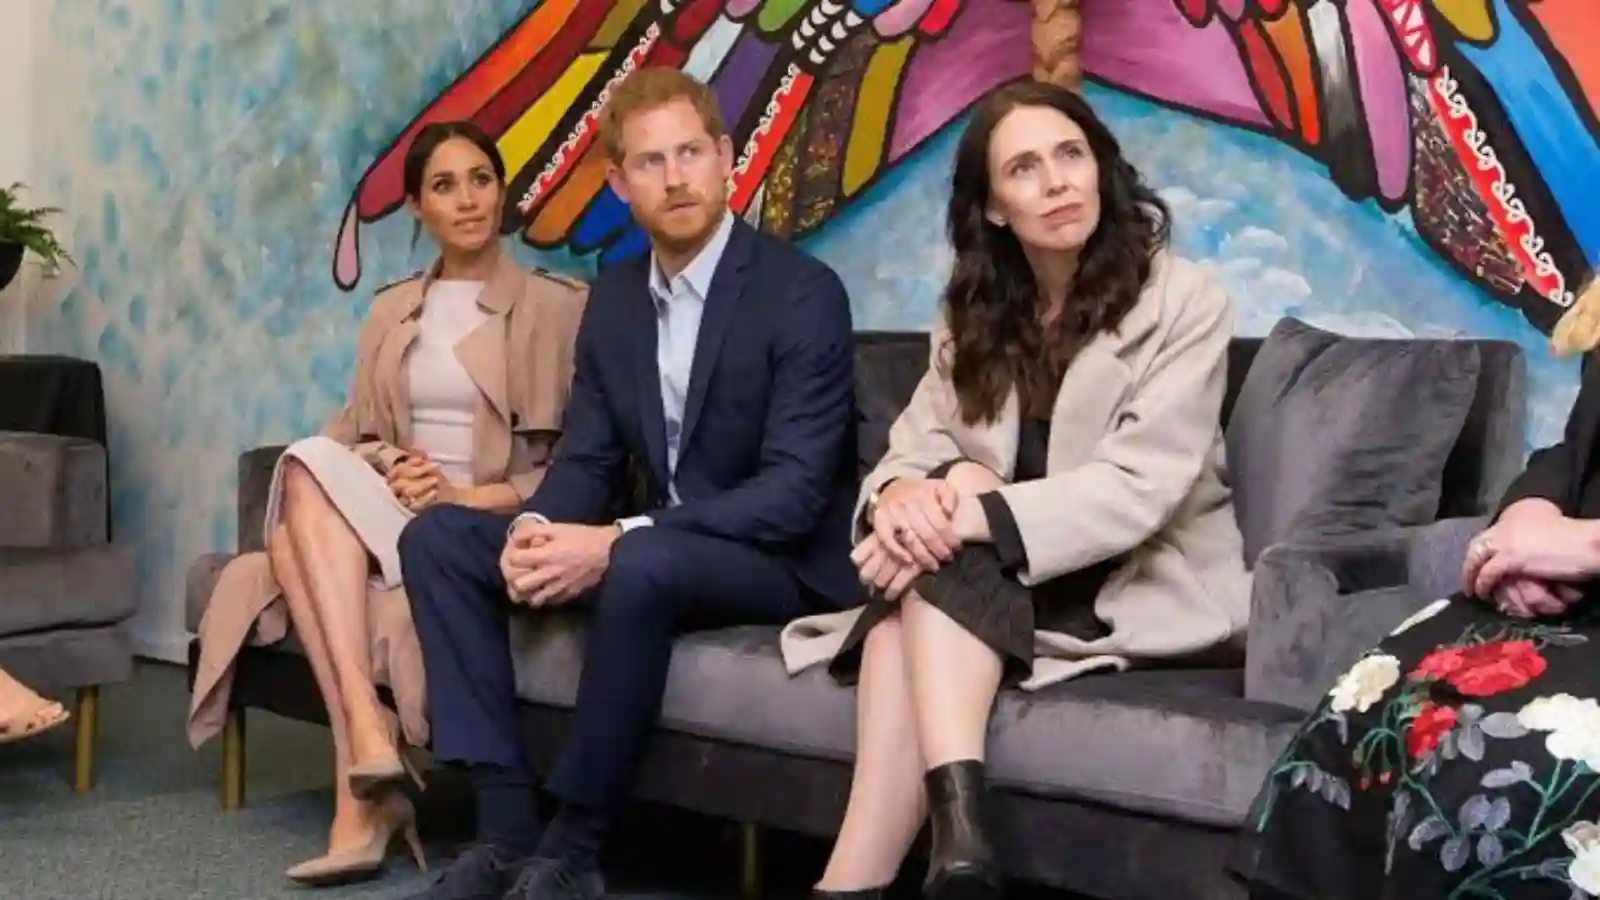 Jacinda Ardern distances herself from Meghan Markle and Prince Harry